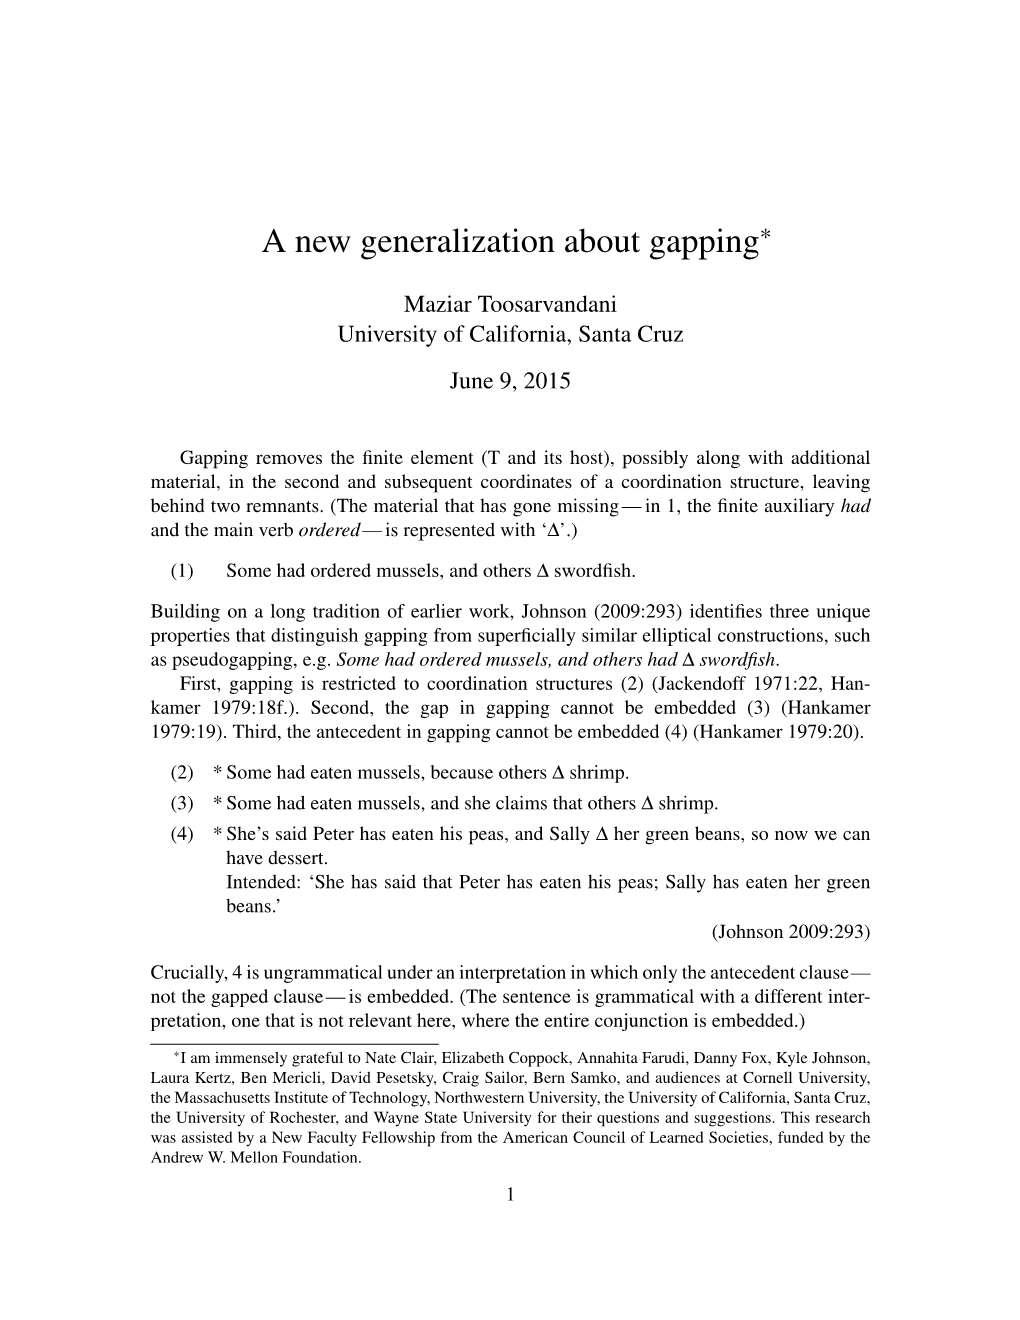 A New Generalization About Gapping*